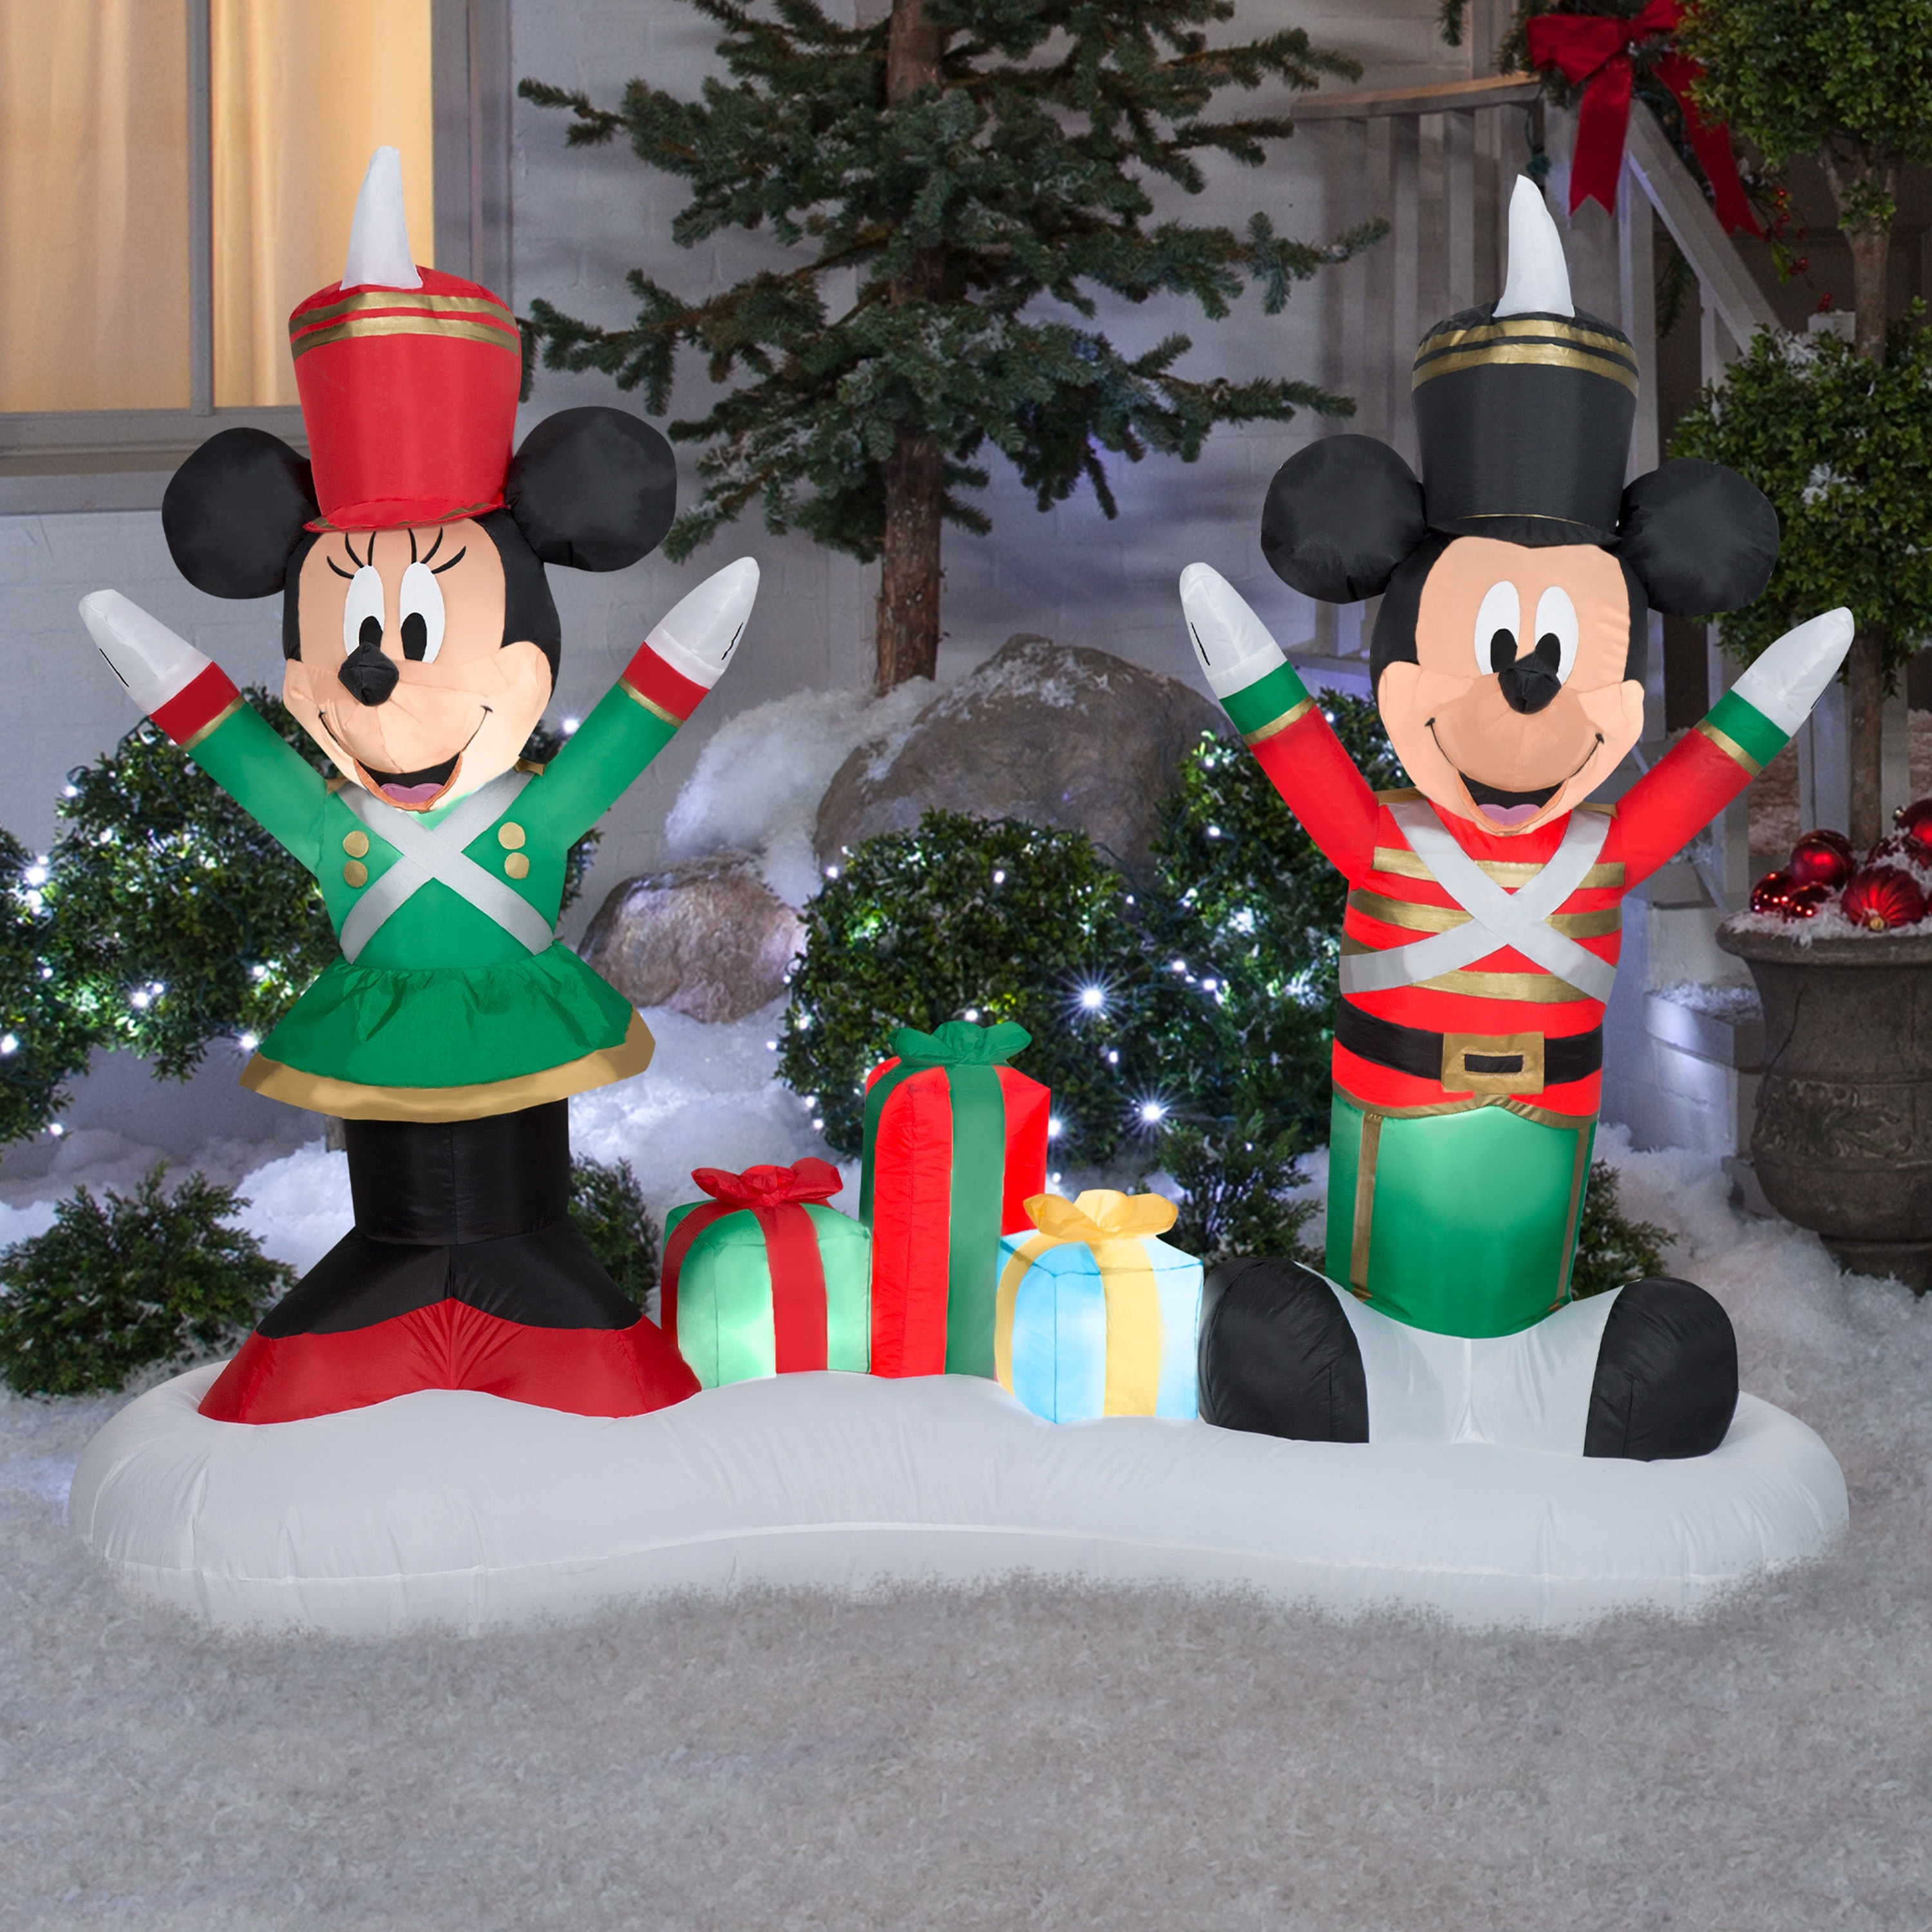 https://ak1.ostkcdn.com/images/products/is/images/direct/72fb30940e4f1451d511c0d72acfffa7e8100cd9/Airblown-Inflatable-Mickey-Mouse-and-Minnie-Mouse-as-Toy-Soldiers.jpg